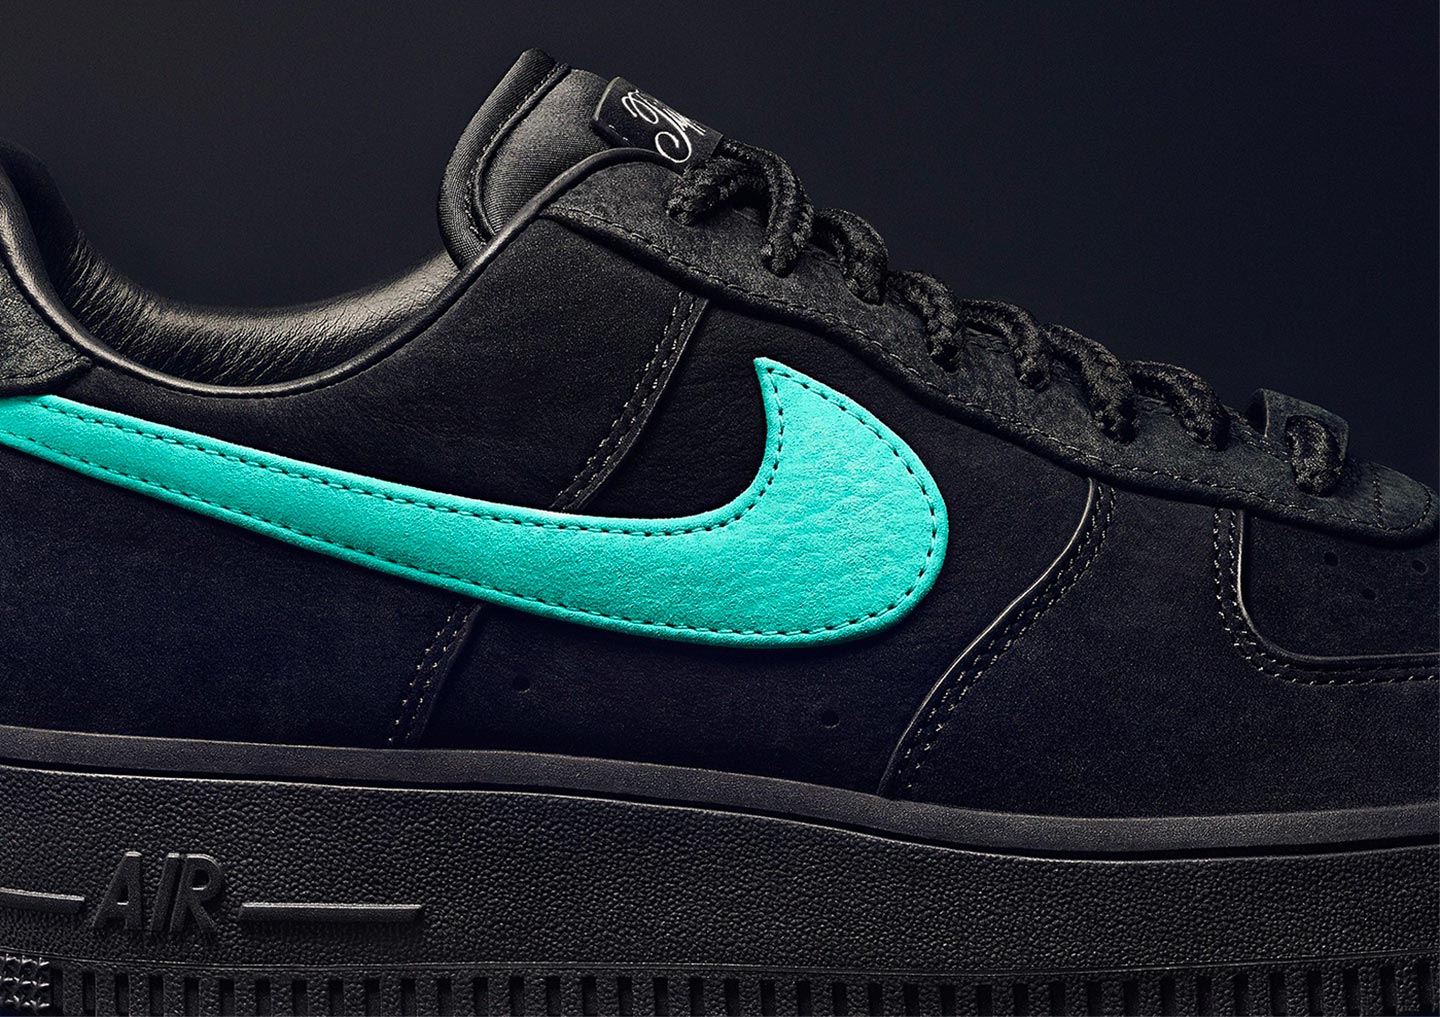 Called "A Legendary Pair", this collaboration between Tiffany & Co. and Nike marks "two iconic American brands coming together in a display of heritage and craftsmanship", reports Tiffany's website